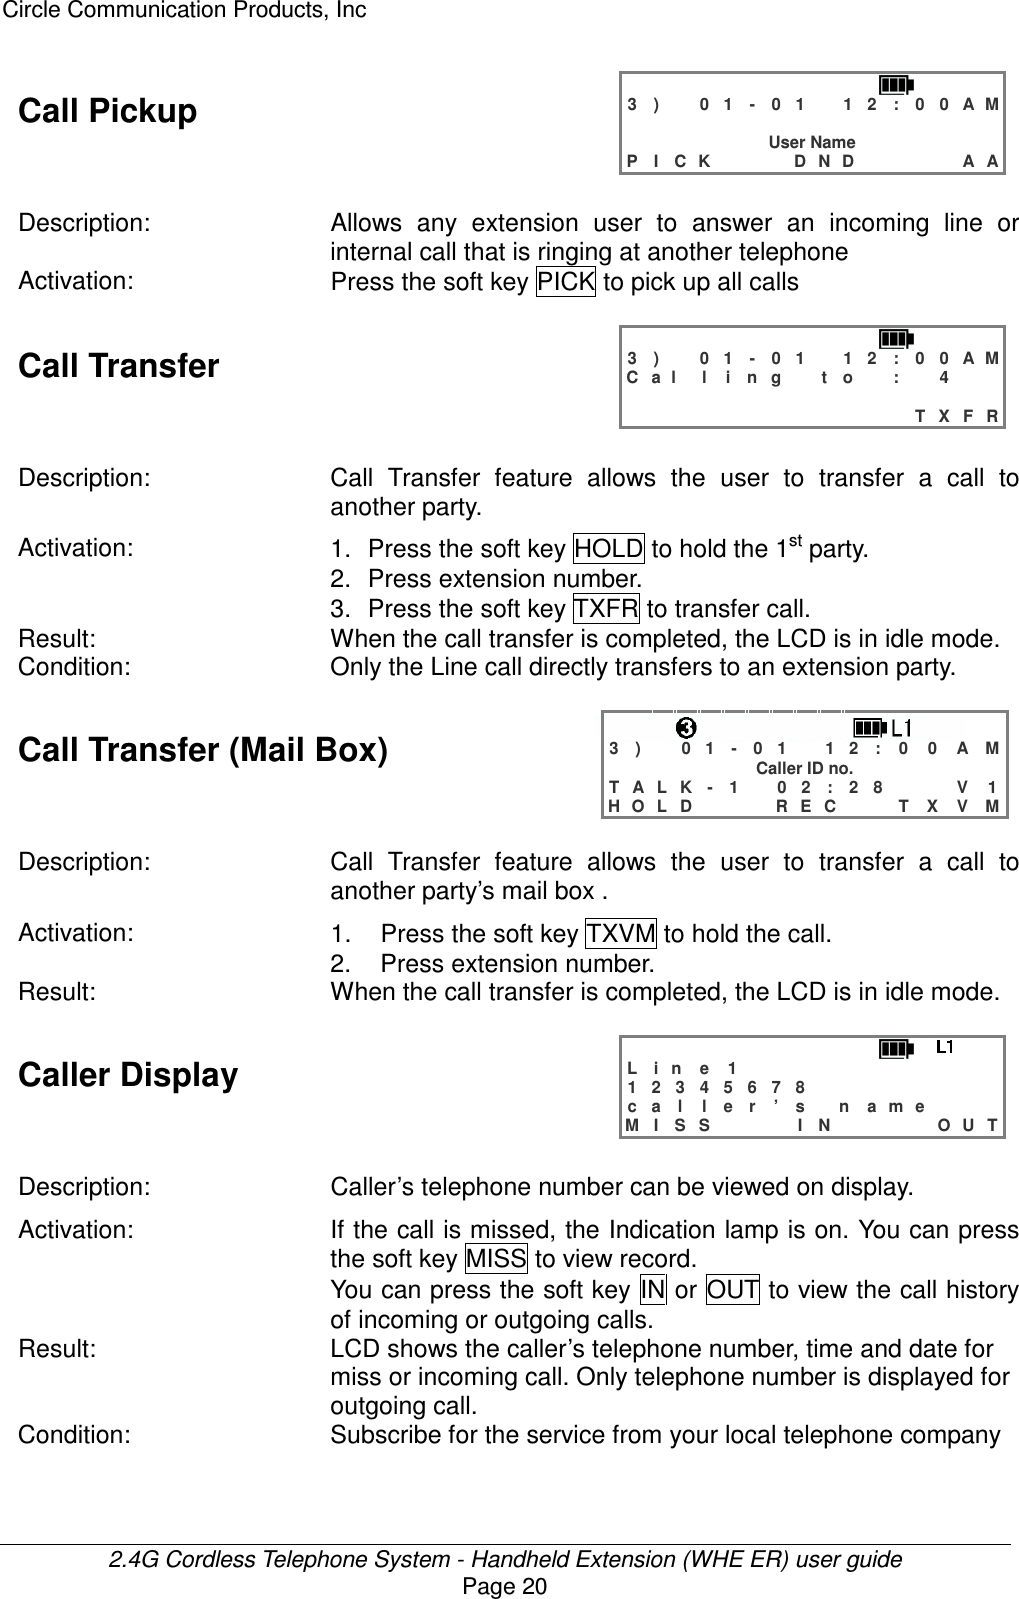 Circle Communication Products, Inc  2.4G Cordless Telephone System - Handheld Extension (WHE ER) user guide Page 20 Call Pickup   3 )   0 1 - 0 1  1 2 : 0 0 A M                 User Name P I C K    D N D     A A  Description:  Allows  any  extension  user  to  answer  an  incoming  line  or internal call that is ringing at another telephone Activation:  Press the soft key PICK to pick up all calls  Call Transfer   3 )   0 1 - 0 1  1 2 : 0 0 A M C a l l i n g  t o  :  4                               T X F R  Description: Call  Transfer  feature  allows  the  user  to  transfer  a  call  to another party. Activation:  1.  Press the soft key HOLD to hold the 1st party. 2.  Press extension number. 3.  Press the soft key TXFR to transfer call. Result:  When the call transfer is completed, the LCD is in idle mode. Condition:  Only the Line call directly transfers to an extension party.  Call Transfer (Mail Box)    3 )   0 1 - 0 1  1 2 : 0 0 A M Caller ID no. T A L K - 1   0 2 : 2 8   V 1 H O L D    R E C   T X V M  Description: Call  Transfer  feature  allows  the  user  to  transfer  a  call  to another party’s mail box . Activation:  1.  Press the soft key TXVM to hold the call. 2.  Press extension number. Result:  When the call transfer is completed, the LCD is in idle mode.  Caller Display   L i n e   1            1 2 3 4 5 6 7 8         c a l l e r ’ s  n a m e    M I S S    I N     O U T  Description:  Caller’s telephone number can be viewed on display. Activation: If the call is missed, the Indication lamp is on. You can press the soft key MISS to view record. You can press the soft key  IN or OUT to view the call history of incoming or outgoing calls. Result:  LCD shows the caller’s telephone number, time and date for miss or incoming call. Only telephone number is displayed for outgoing call. Condition:  Subscribe for the service from your local telephone company  